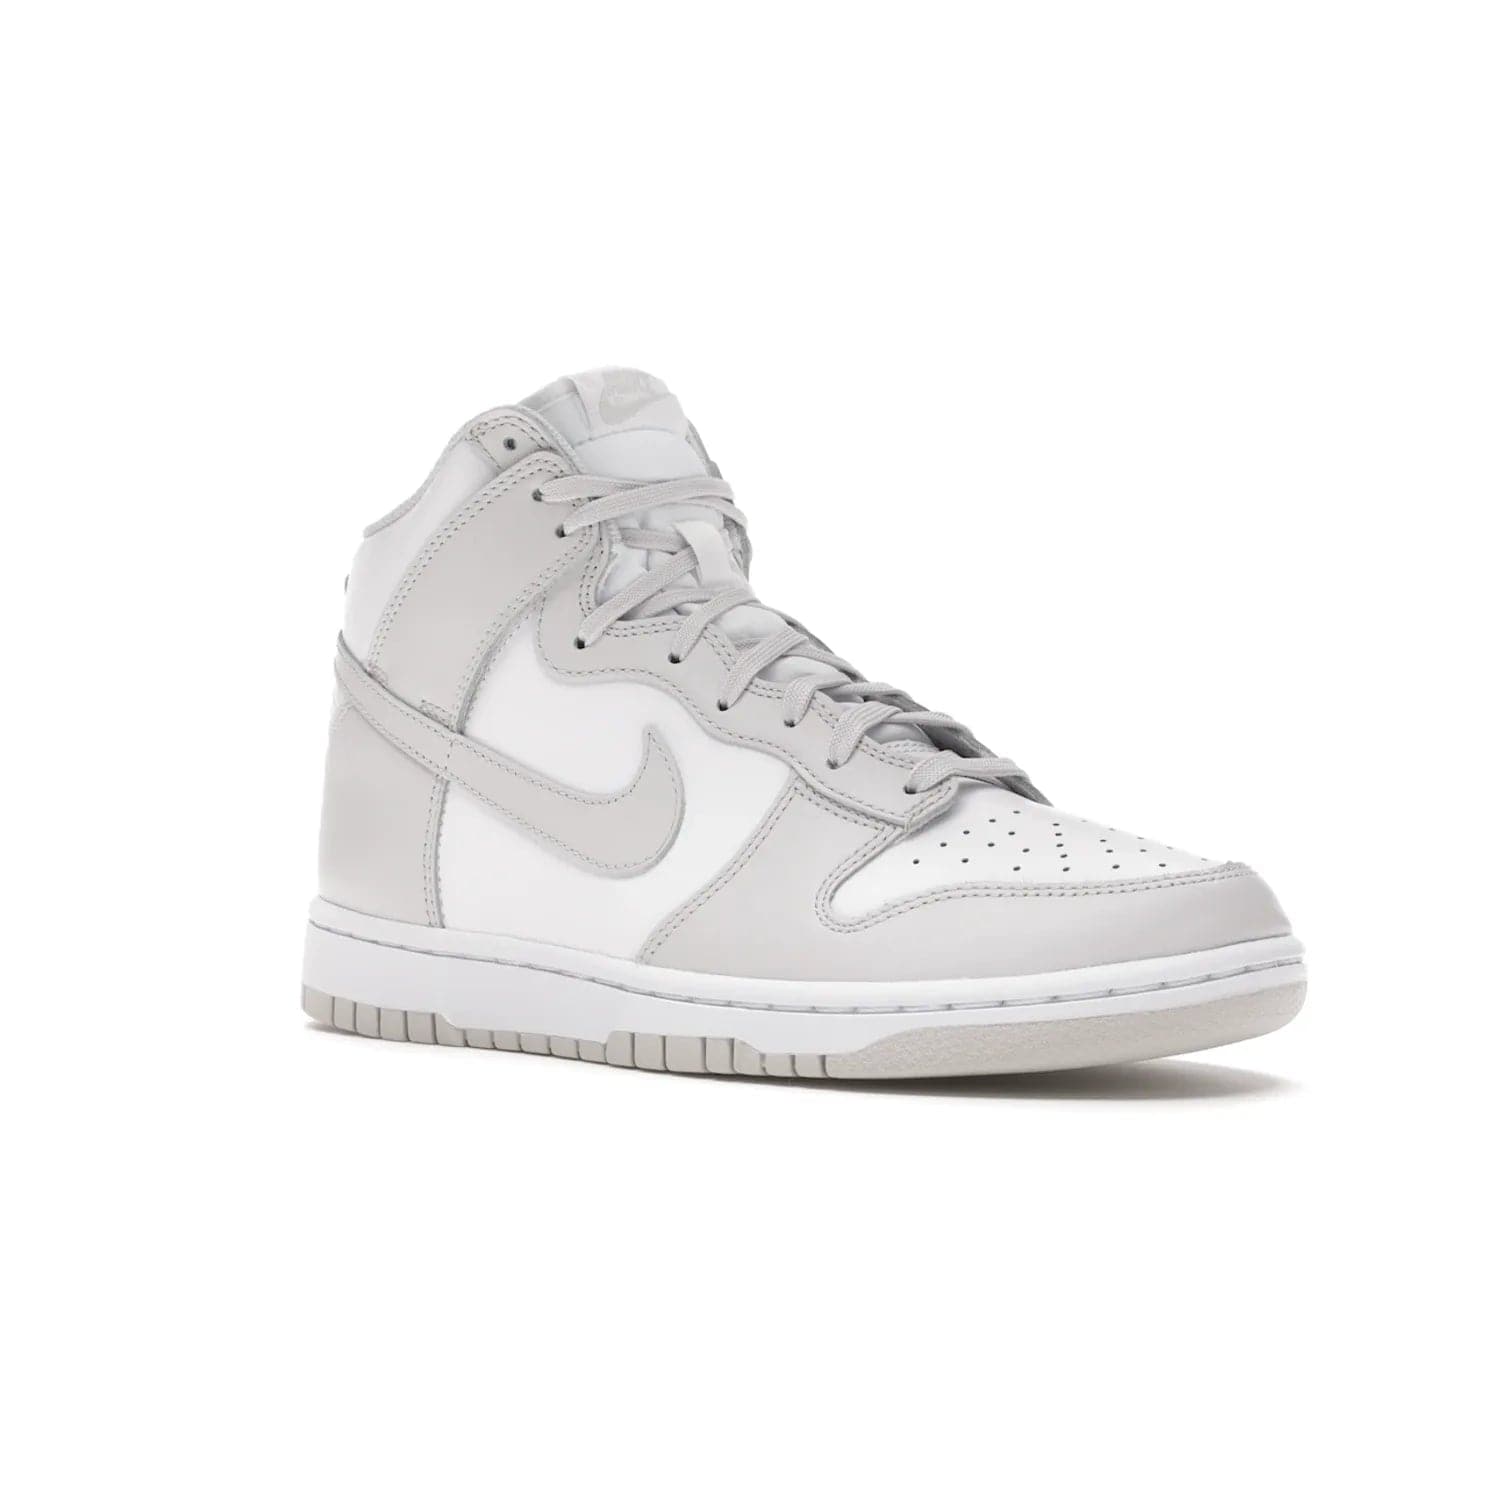 Nike Dunk High Retro White Vast Grey (2021) - Image 5 - Only at www.BallersClubKickz.com - Nike Dunk High Retro White Vast Grey 2021: classic '80s basketball sneaker with a crisp white base, grey overlays, midsole tooling and outsole. Dropped Feb. 2021.